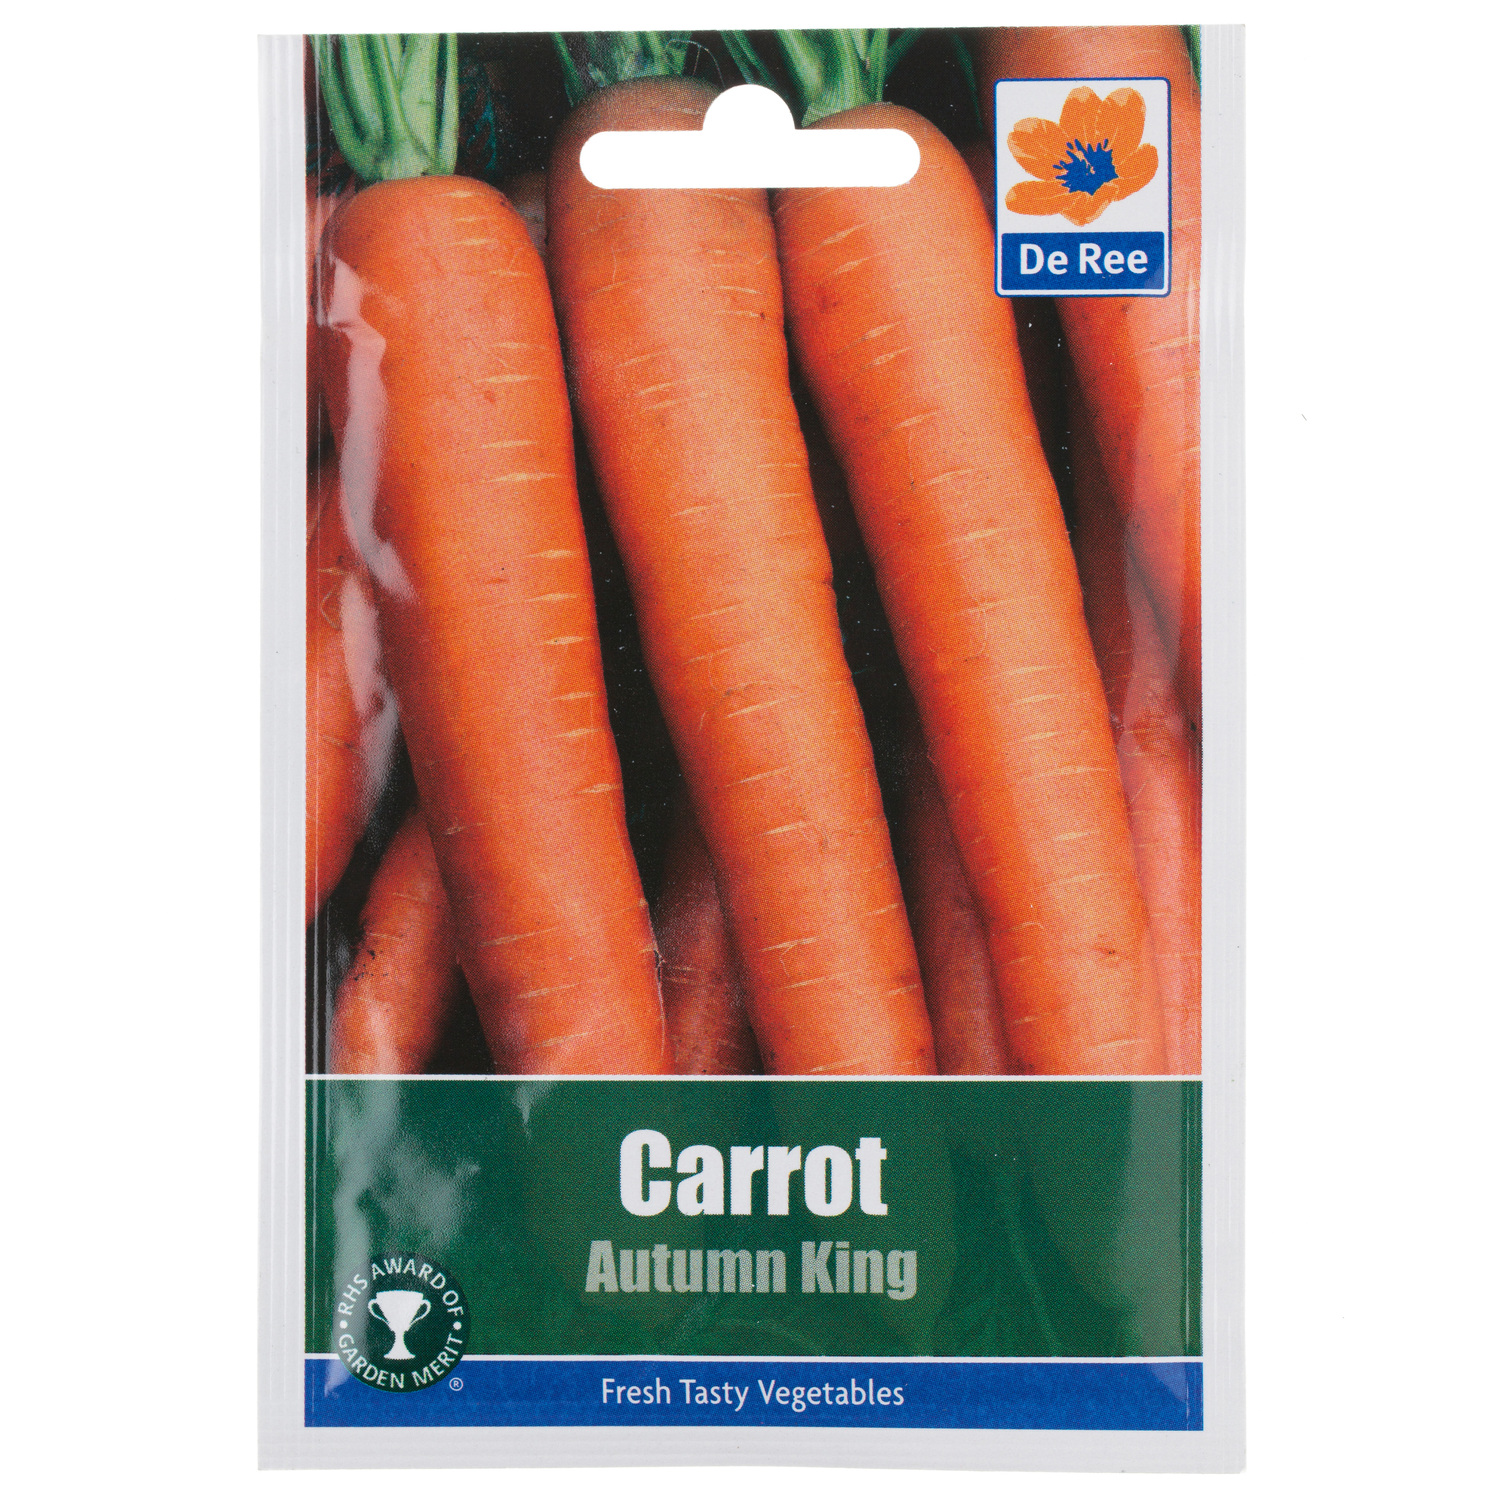 Autumn King Late Carrot Seed Packet - Carrot Image